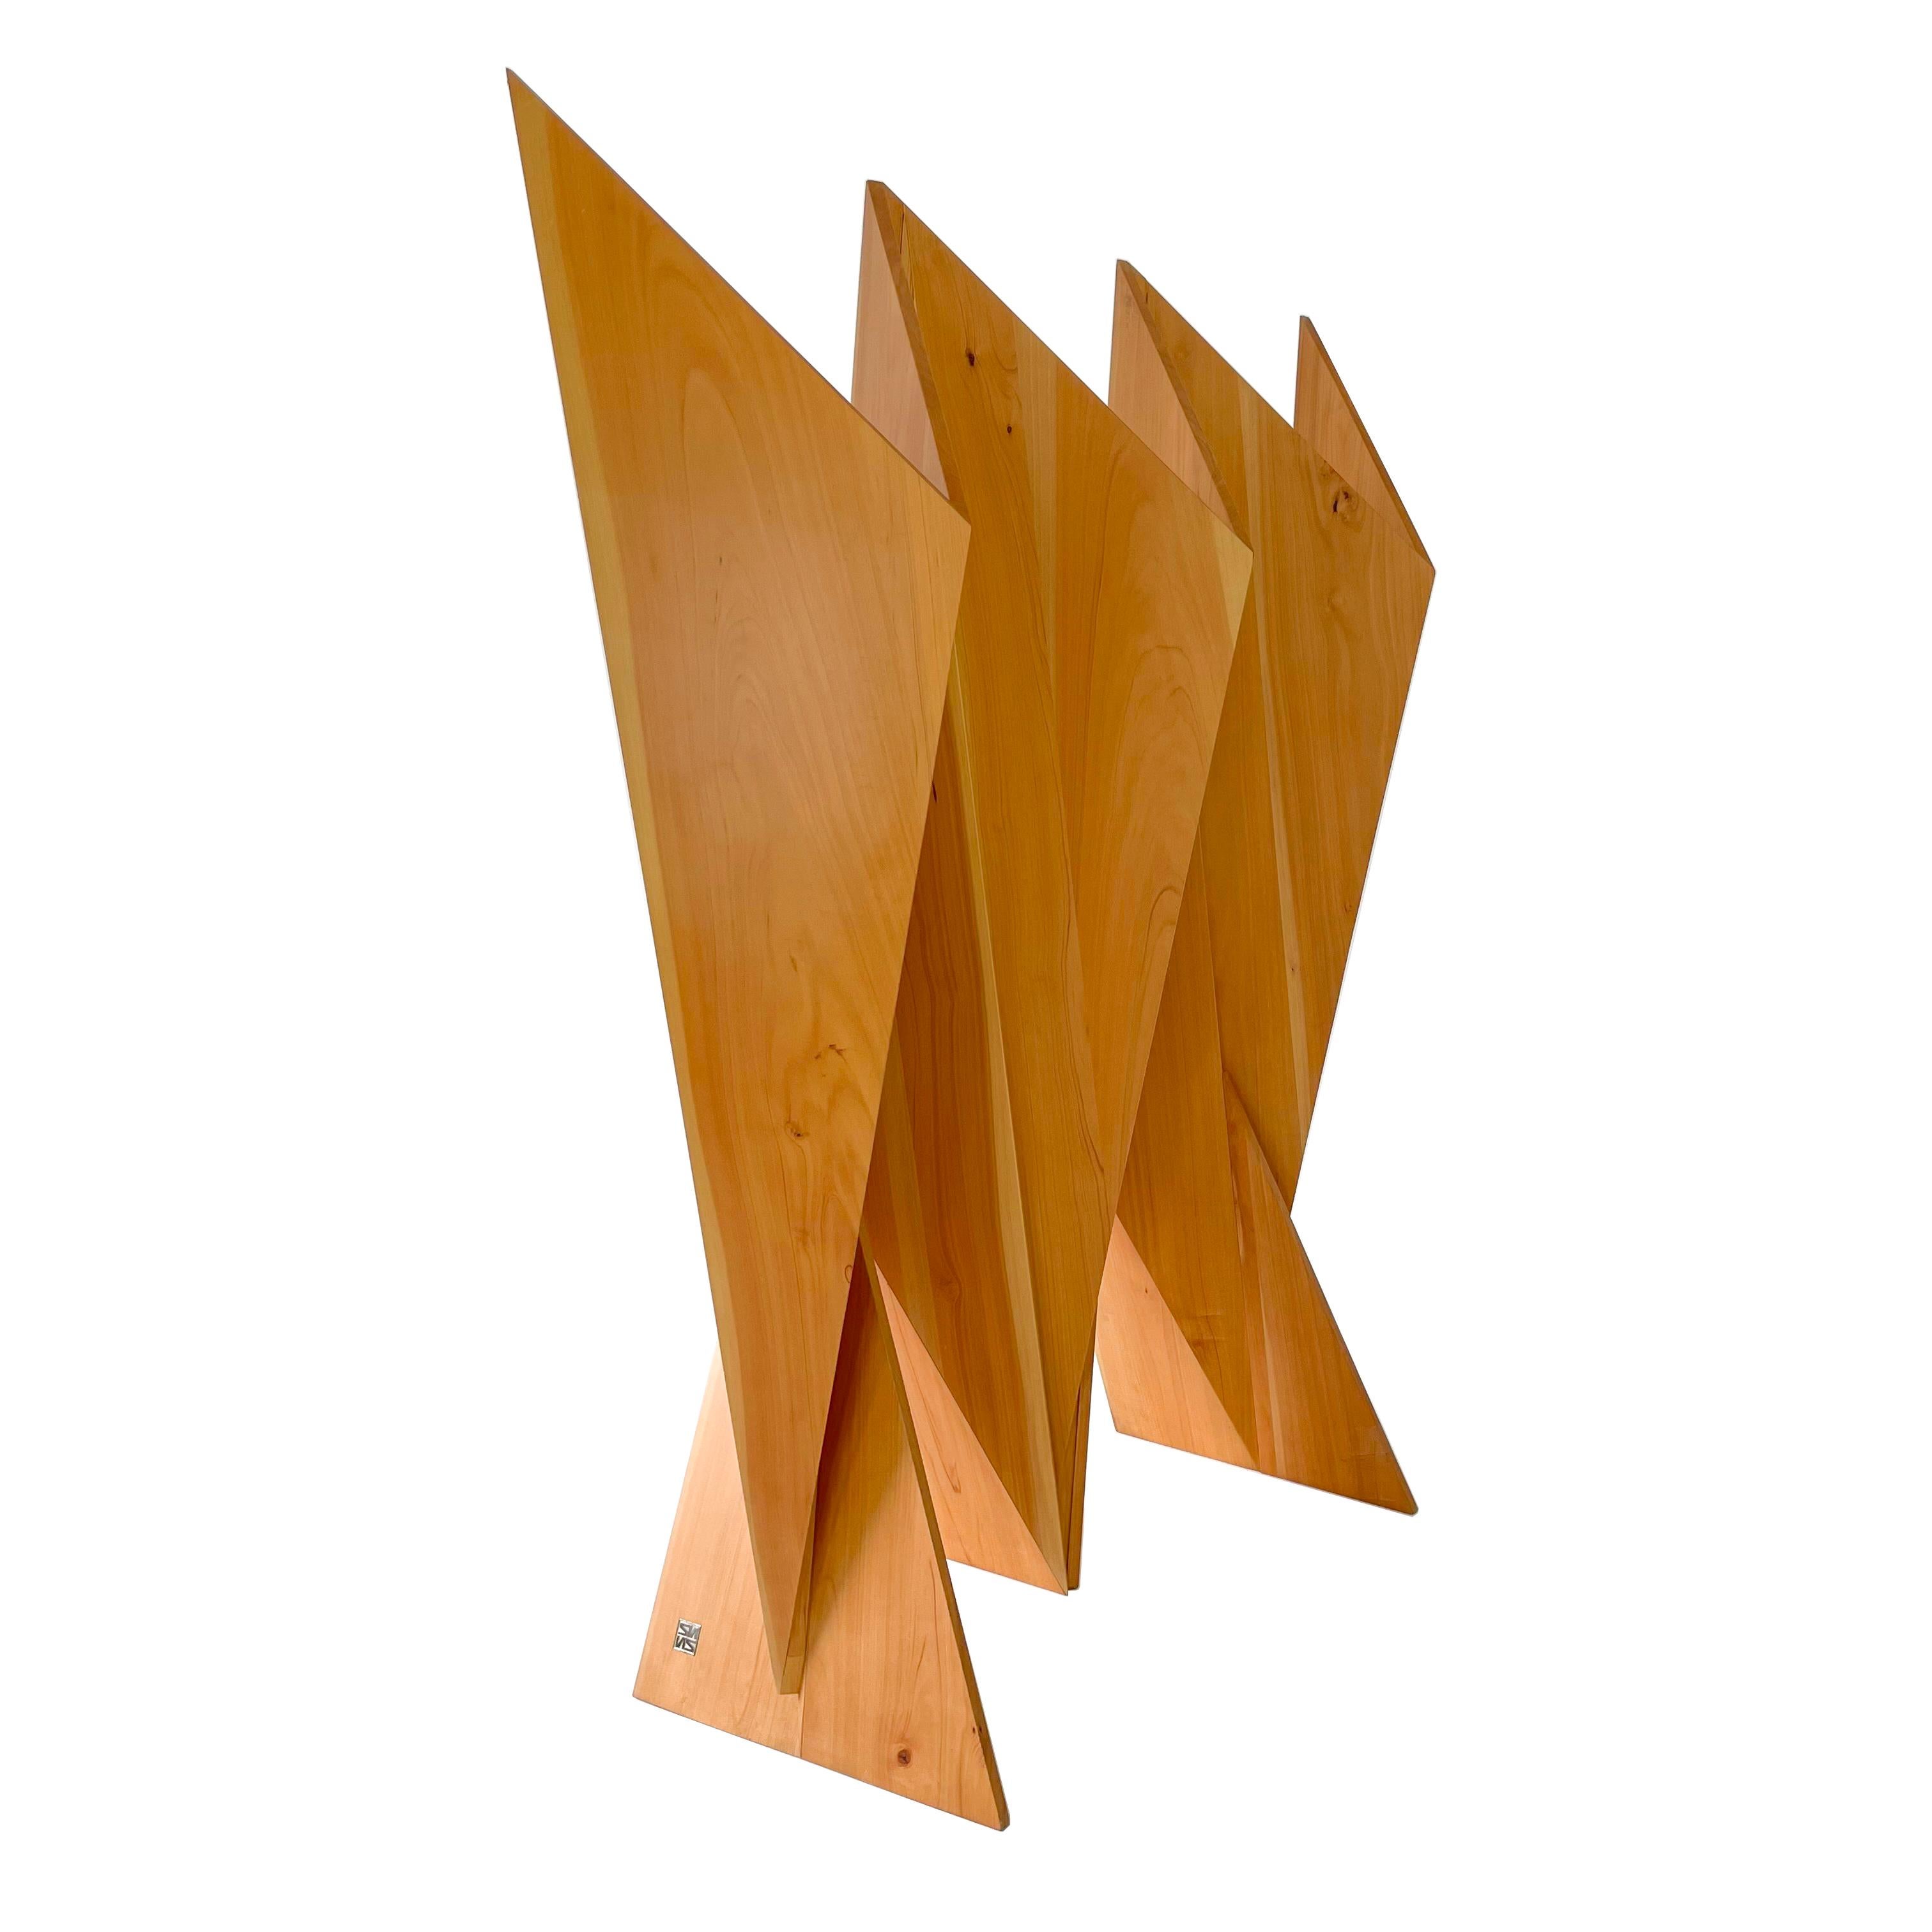 Modern Solid Wood Sculpture screen by Pierre Sarkis from Valentina Collection. Inspired in the Origami Folds theory. Finding in basic geometry meaning of life, truth and beauty. Artistic wooden screen perfect for lobby hall or open